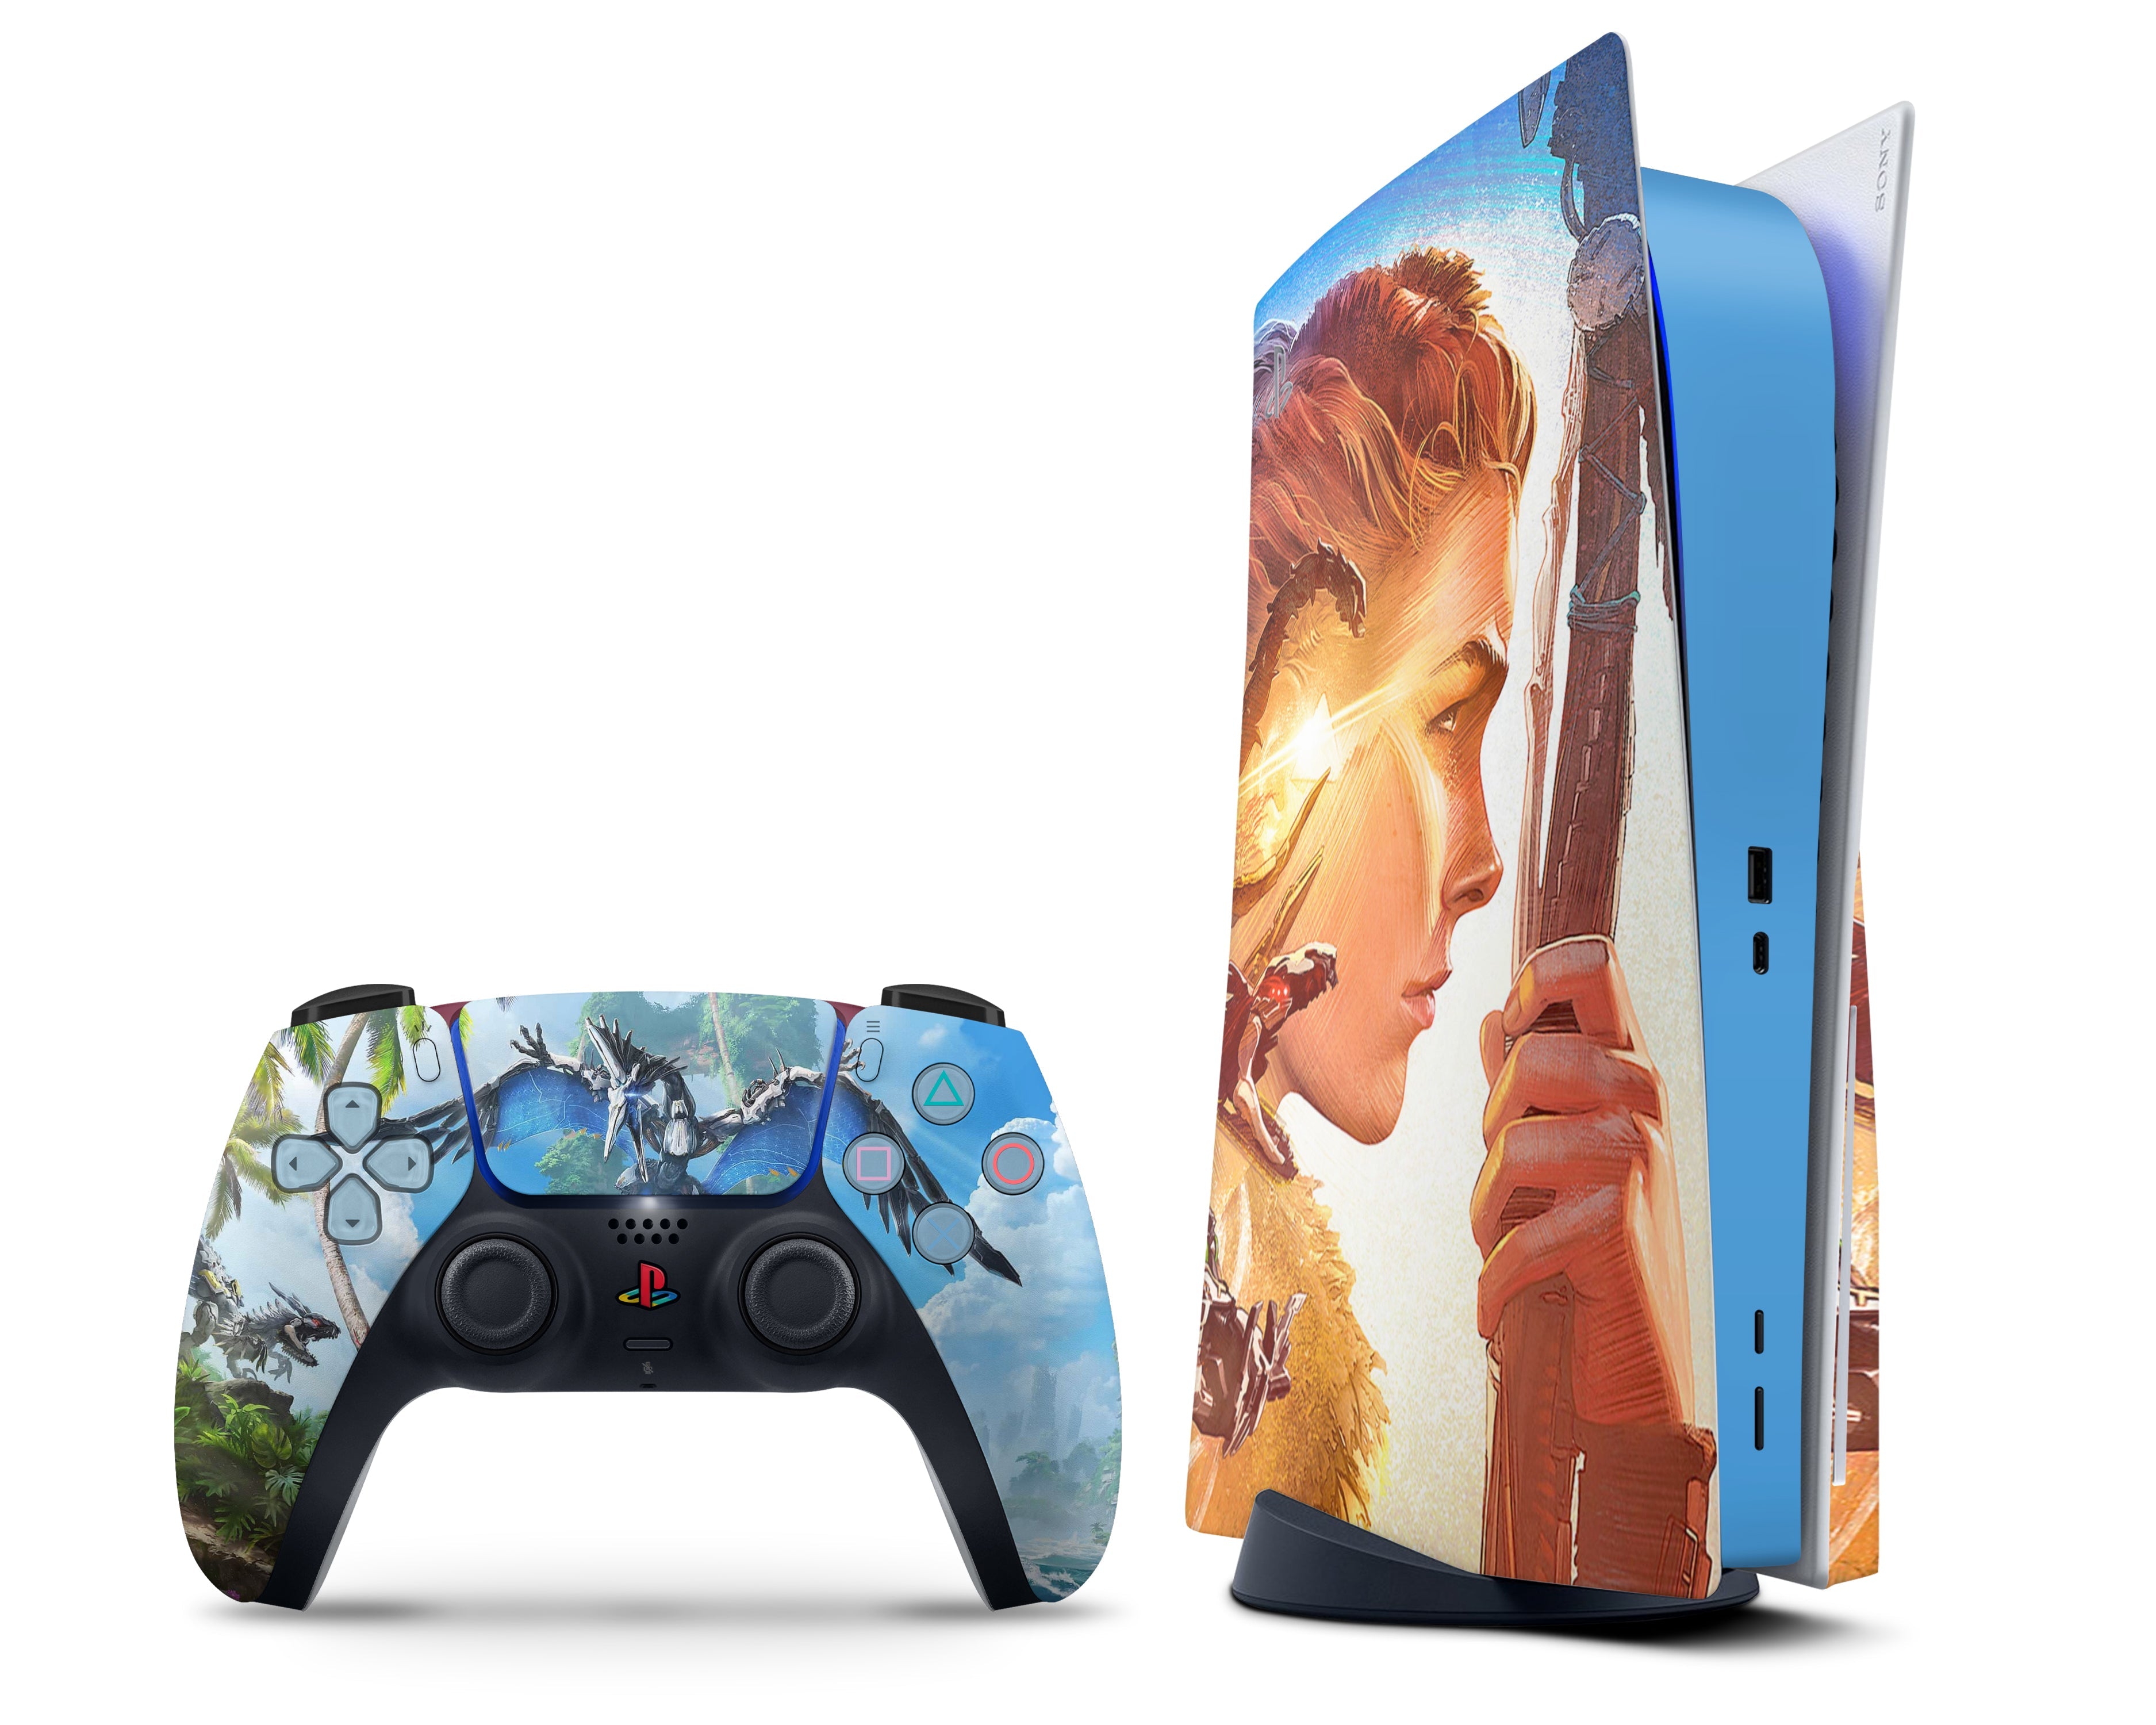 CONSOLE SONY PS5 EDITION STANDARD + JEUX HORIZON FORBIDDEN WESTR + MANETTE  CAMOUFLAGE PS5